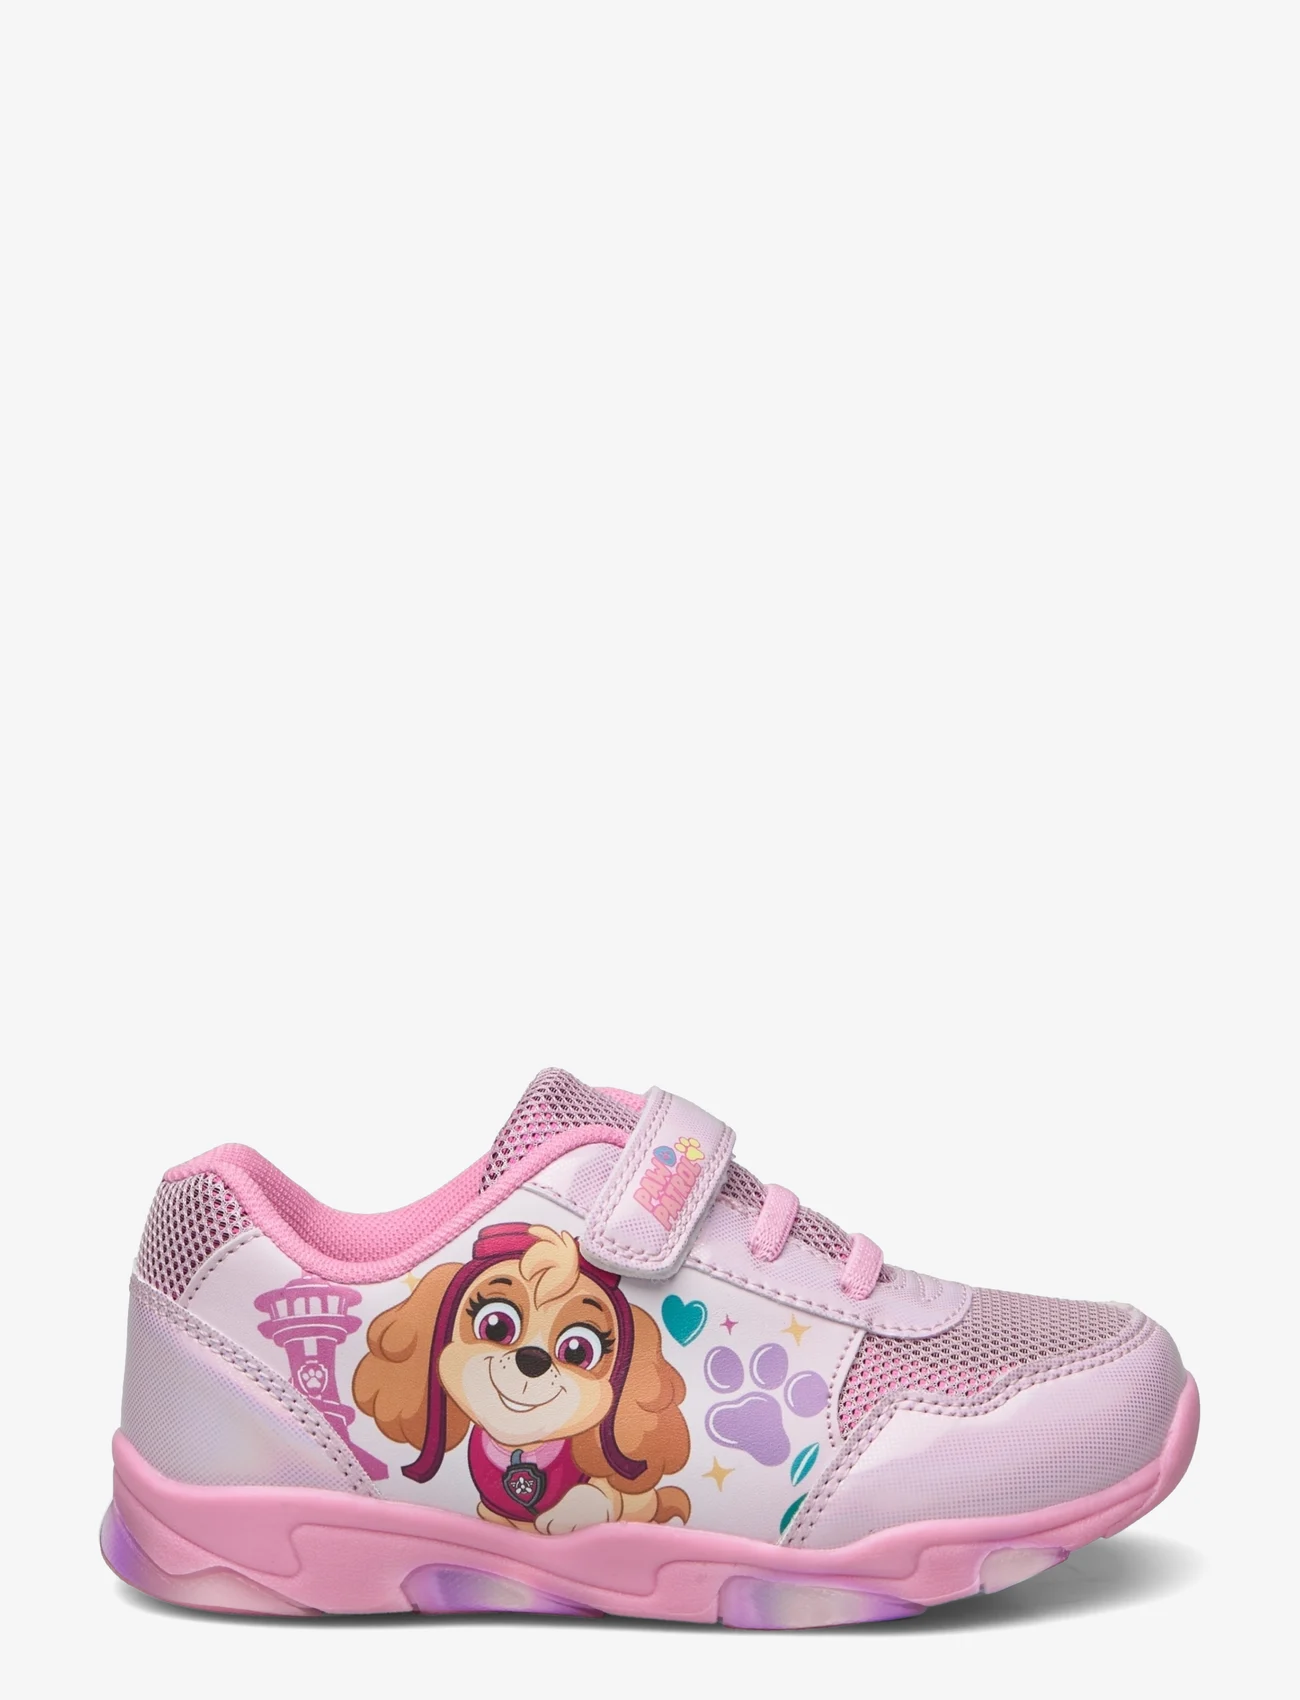 Leomil - PAWPATROL sneakers - sommarfynd - light pink/pink - 1